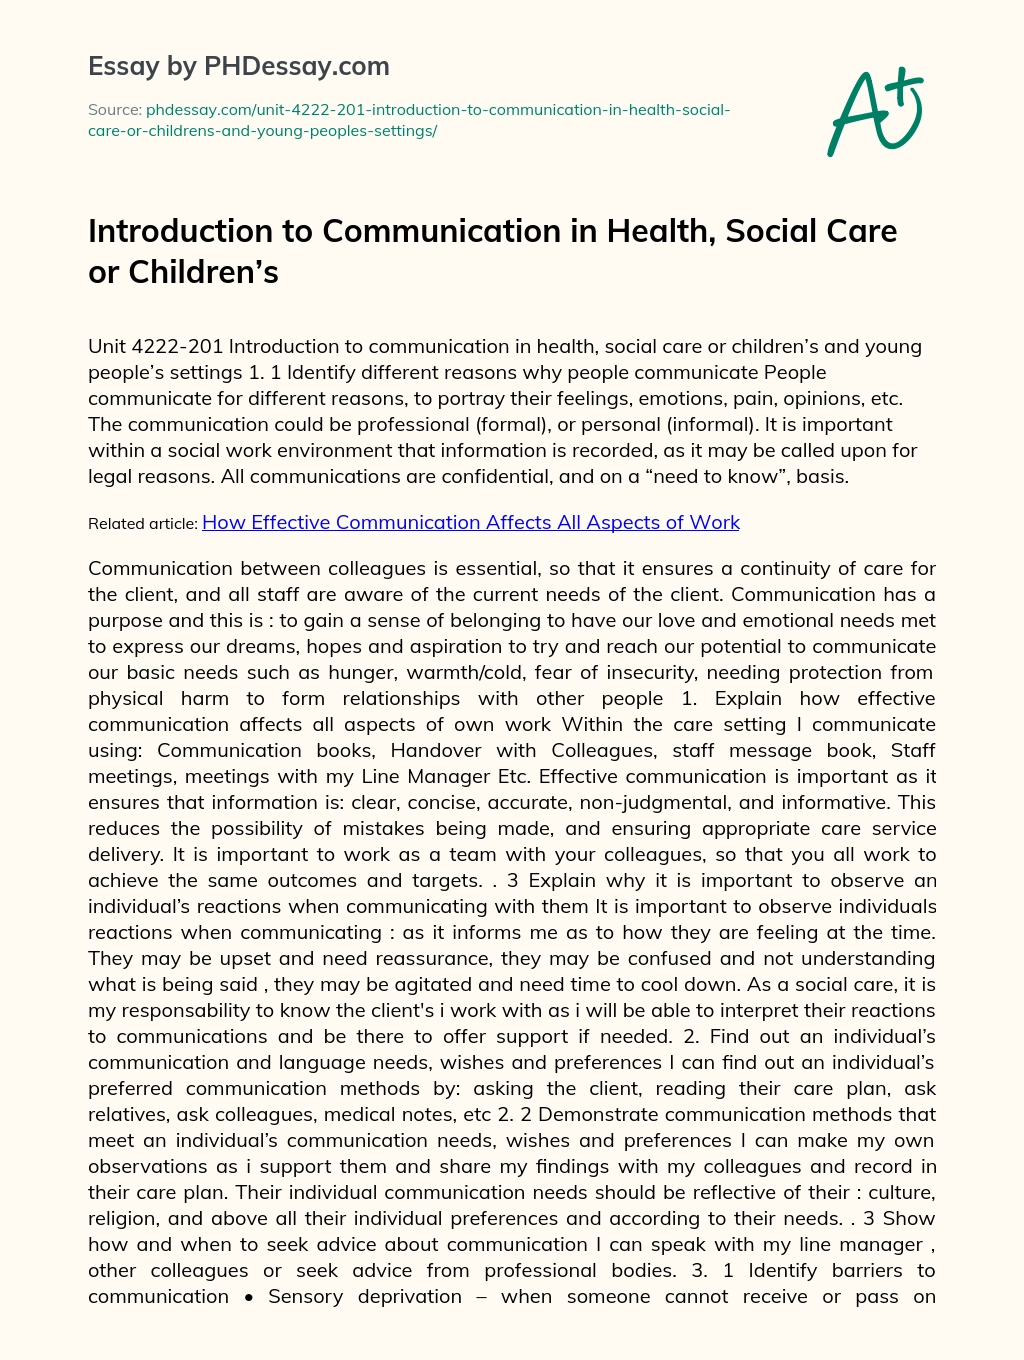 Introduction to Communication in Health, Social Care or Children’s essay